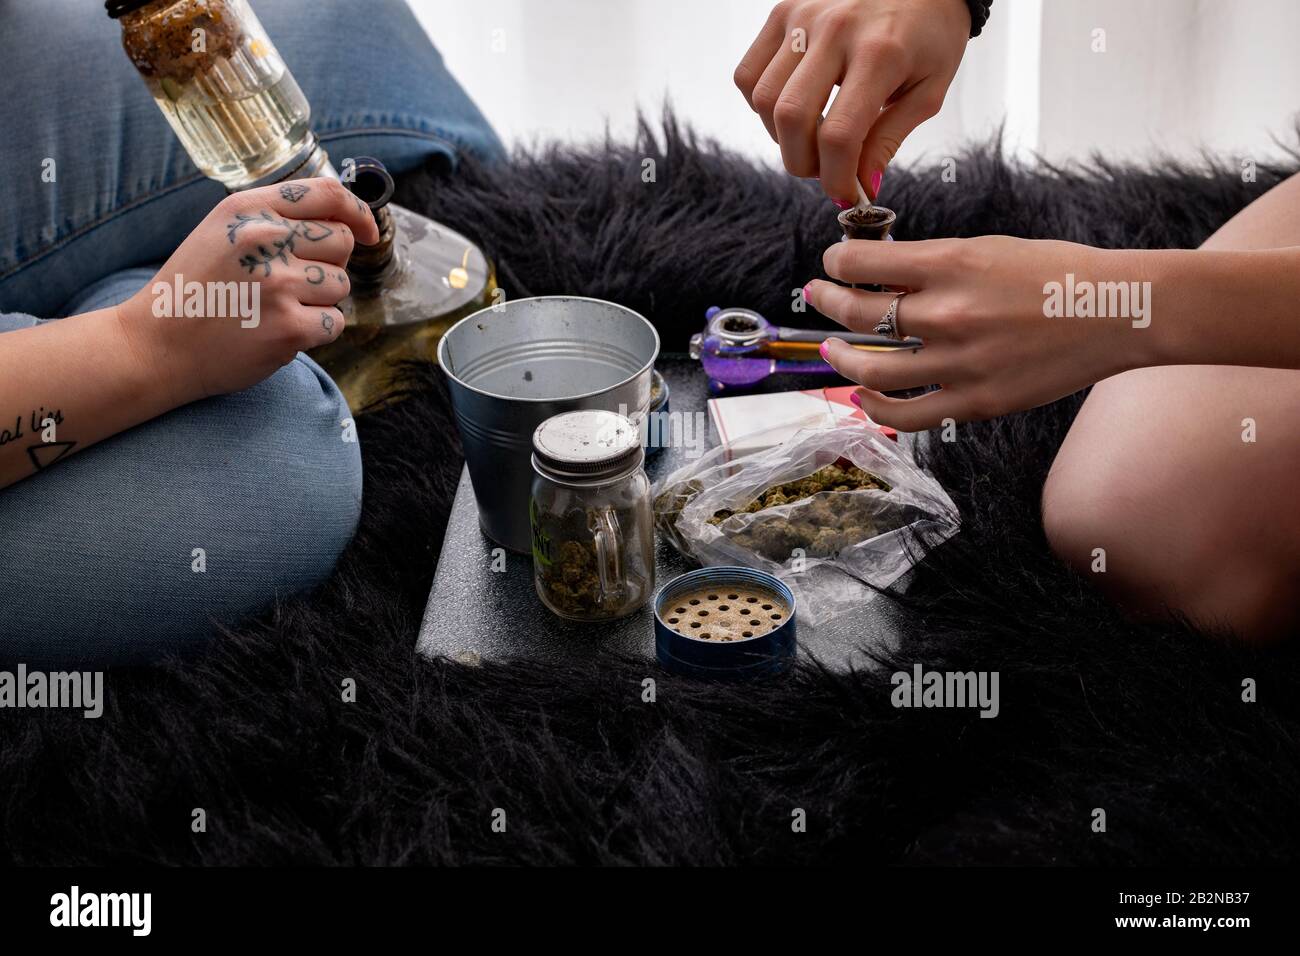 Two People Using Recreational Cannabis with User Paraphernalia Stock Photo